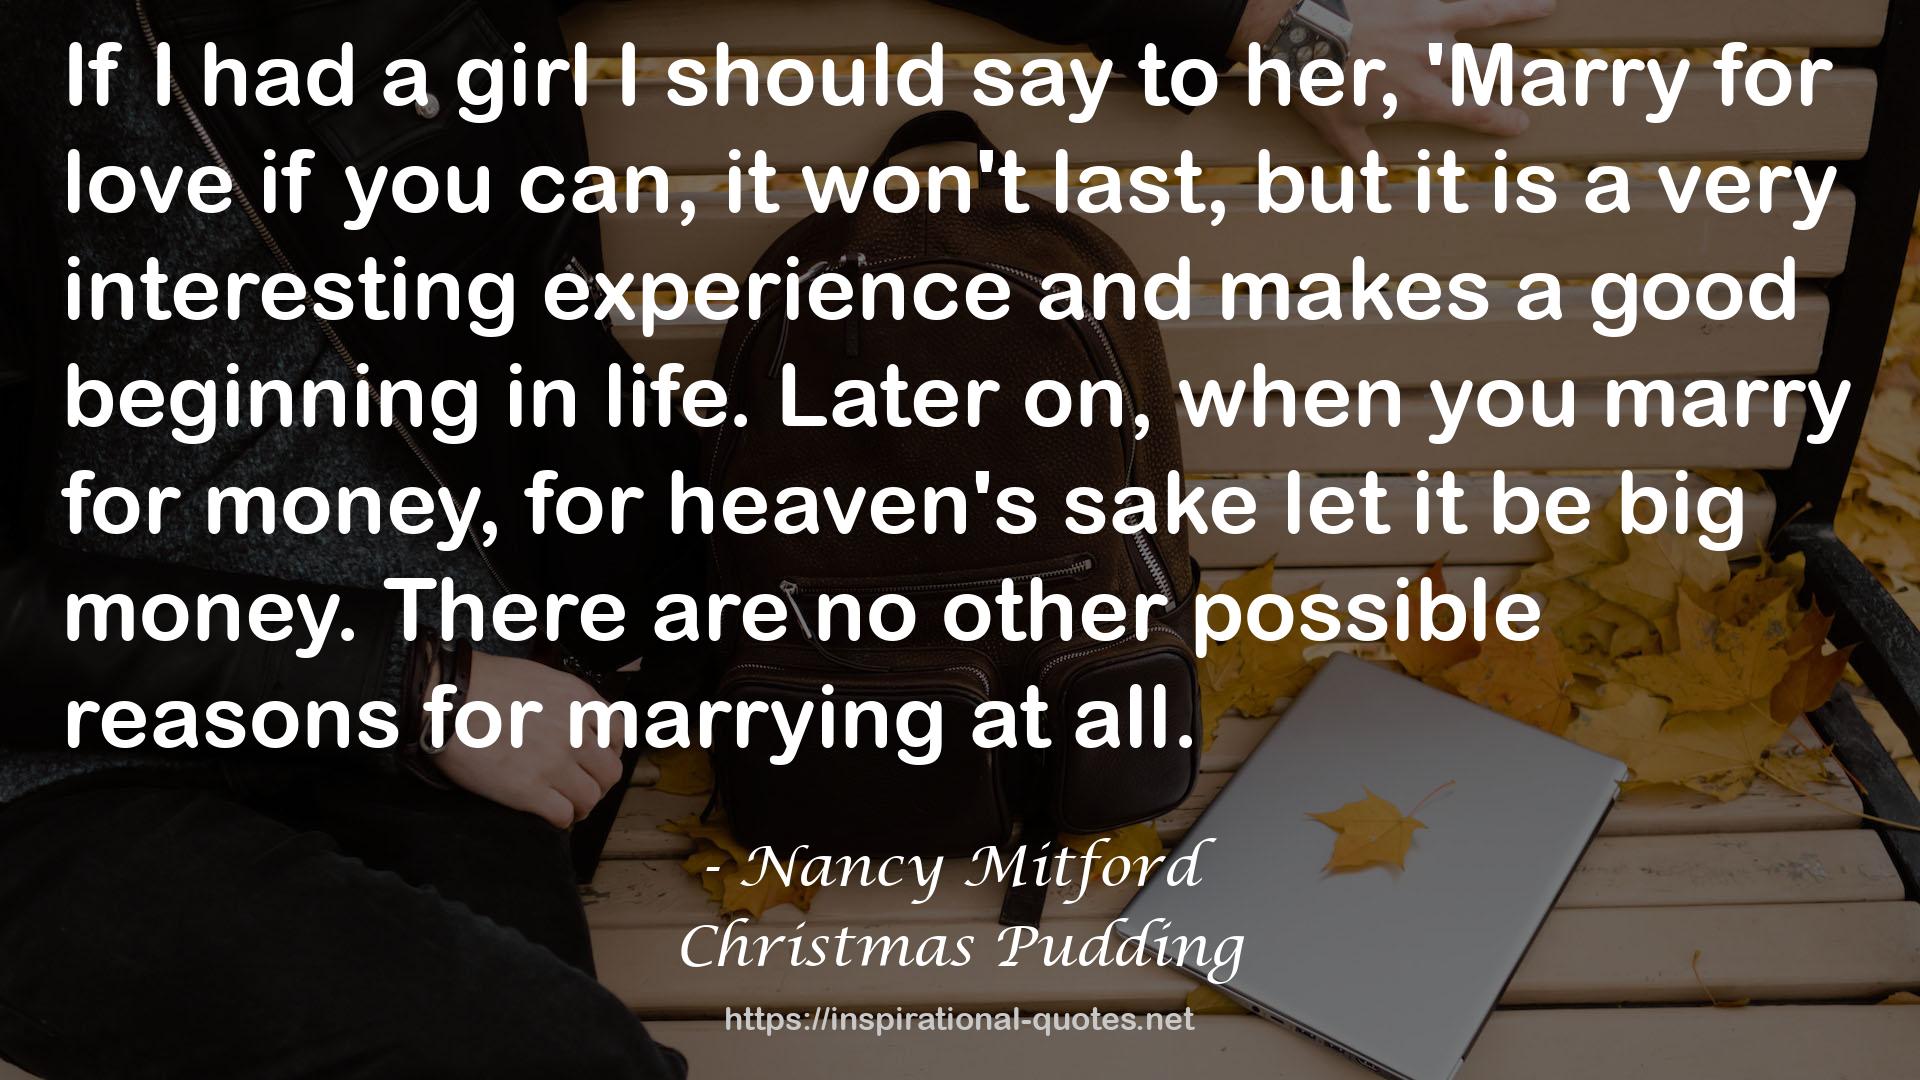 Christmas Pudding QUOTES